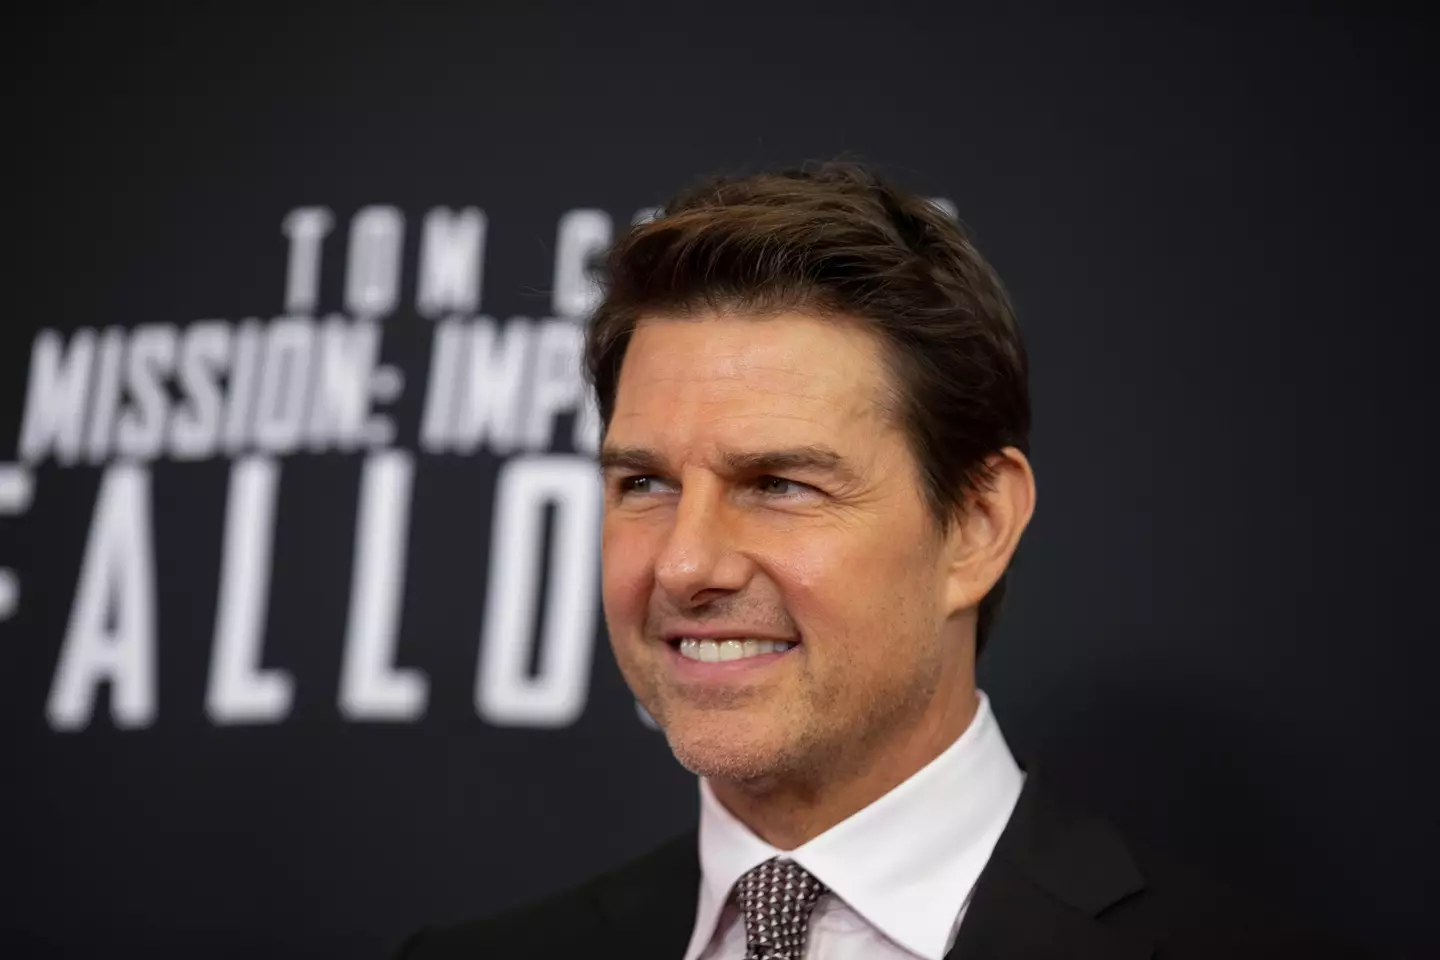 Tom Cruise is against the use of antidepressants - something Judd Apatow recently poked fun at.